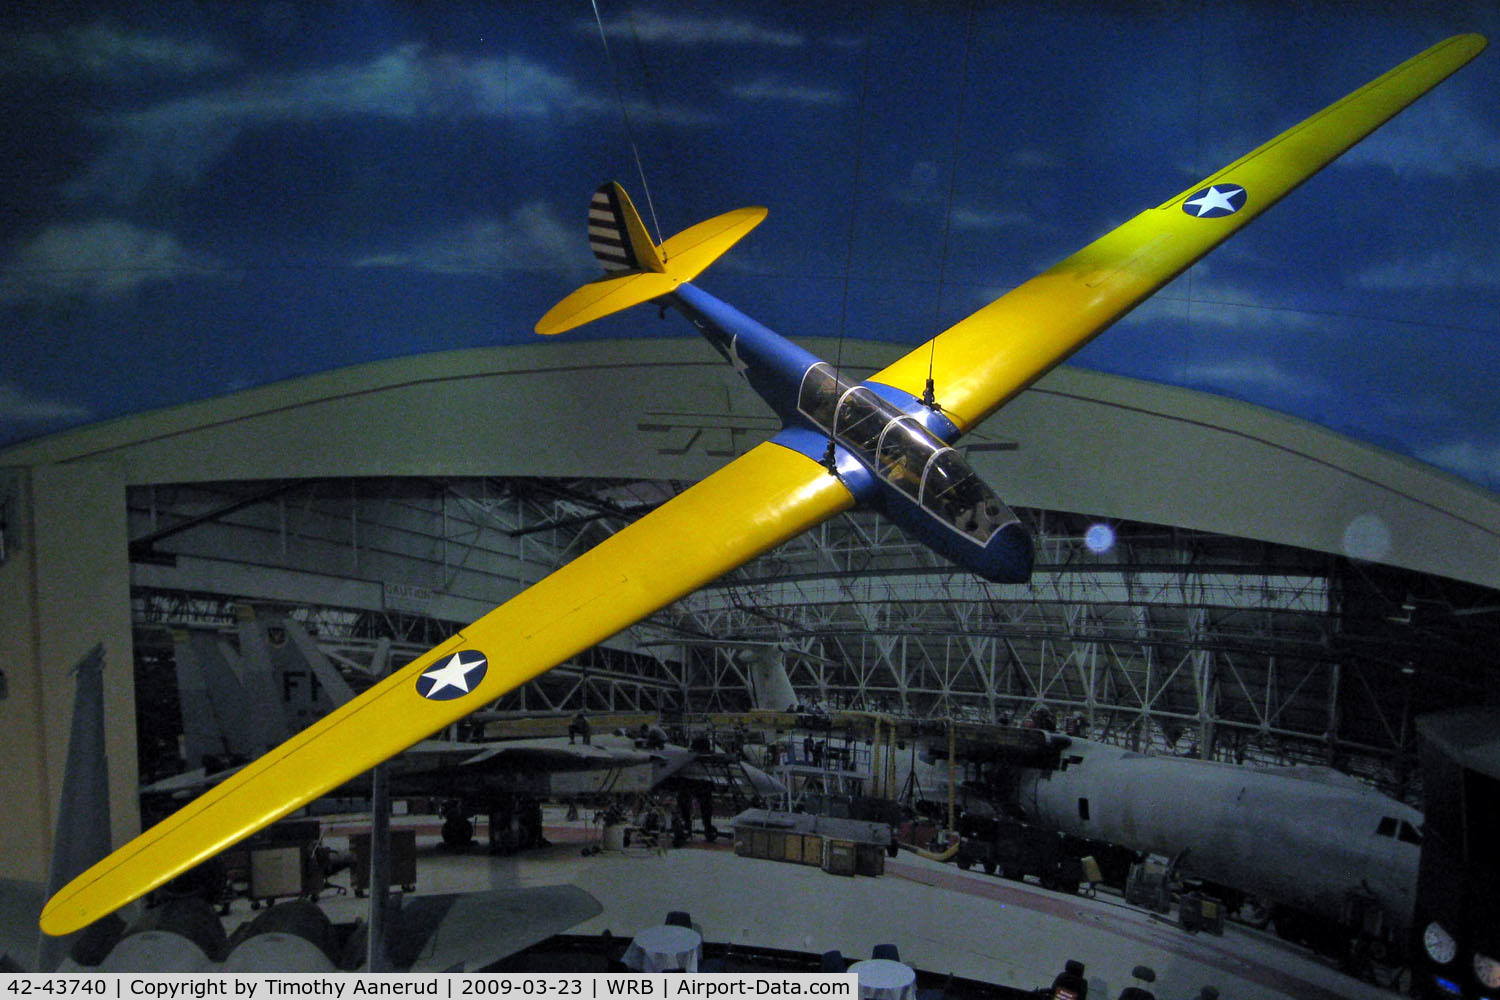 42-43740, 1943 Laister-Kauffman TG-4 C/N Not found 42-43740, Museum of Aviation, Robins AFB